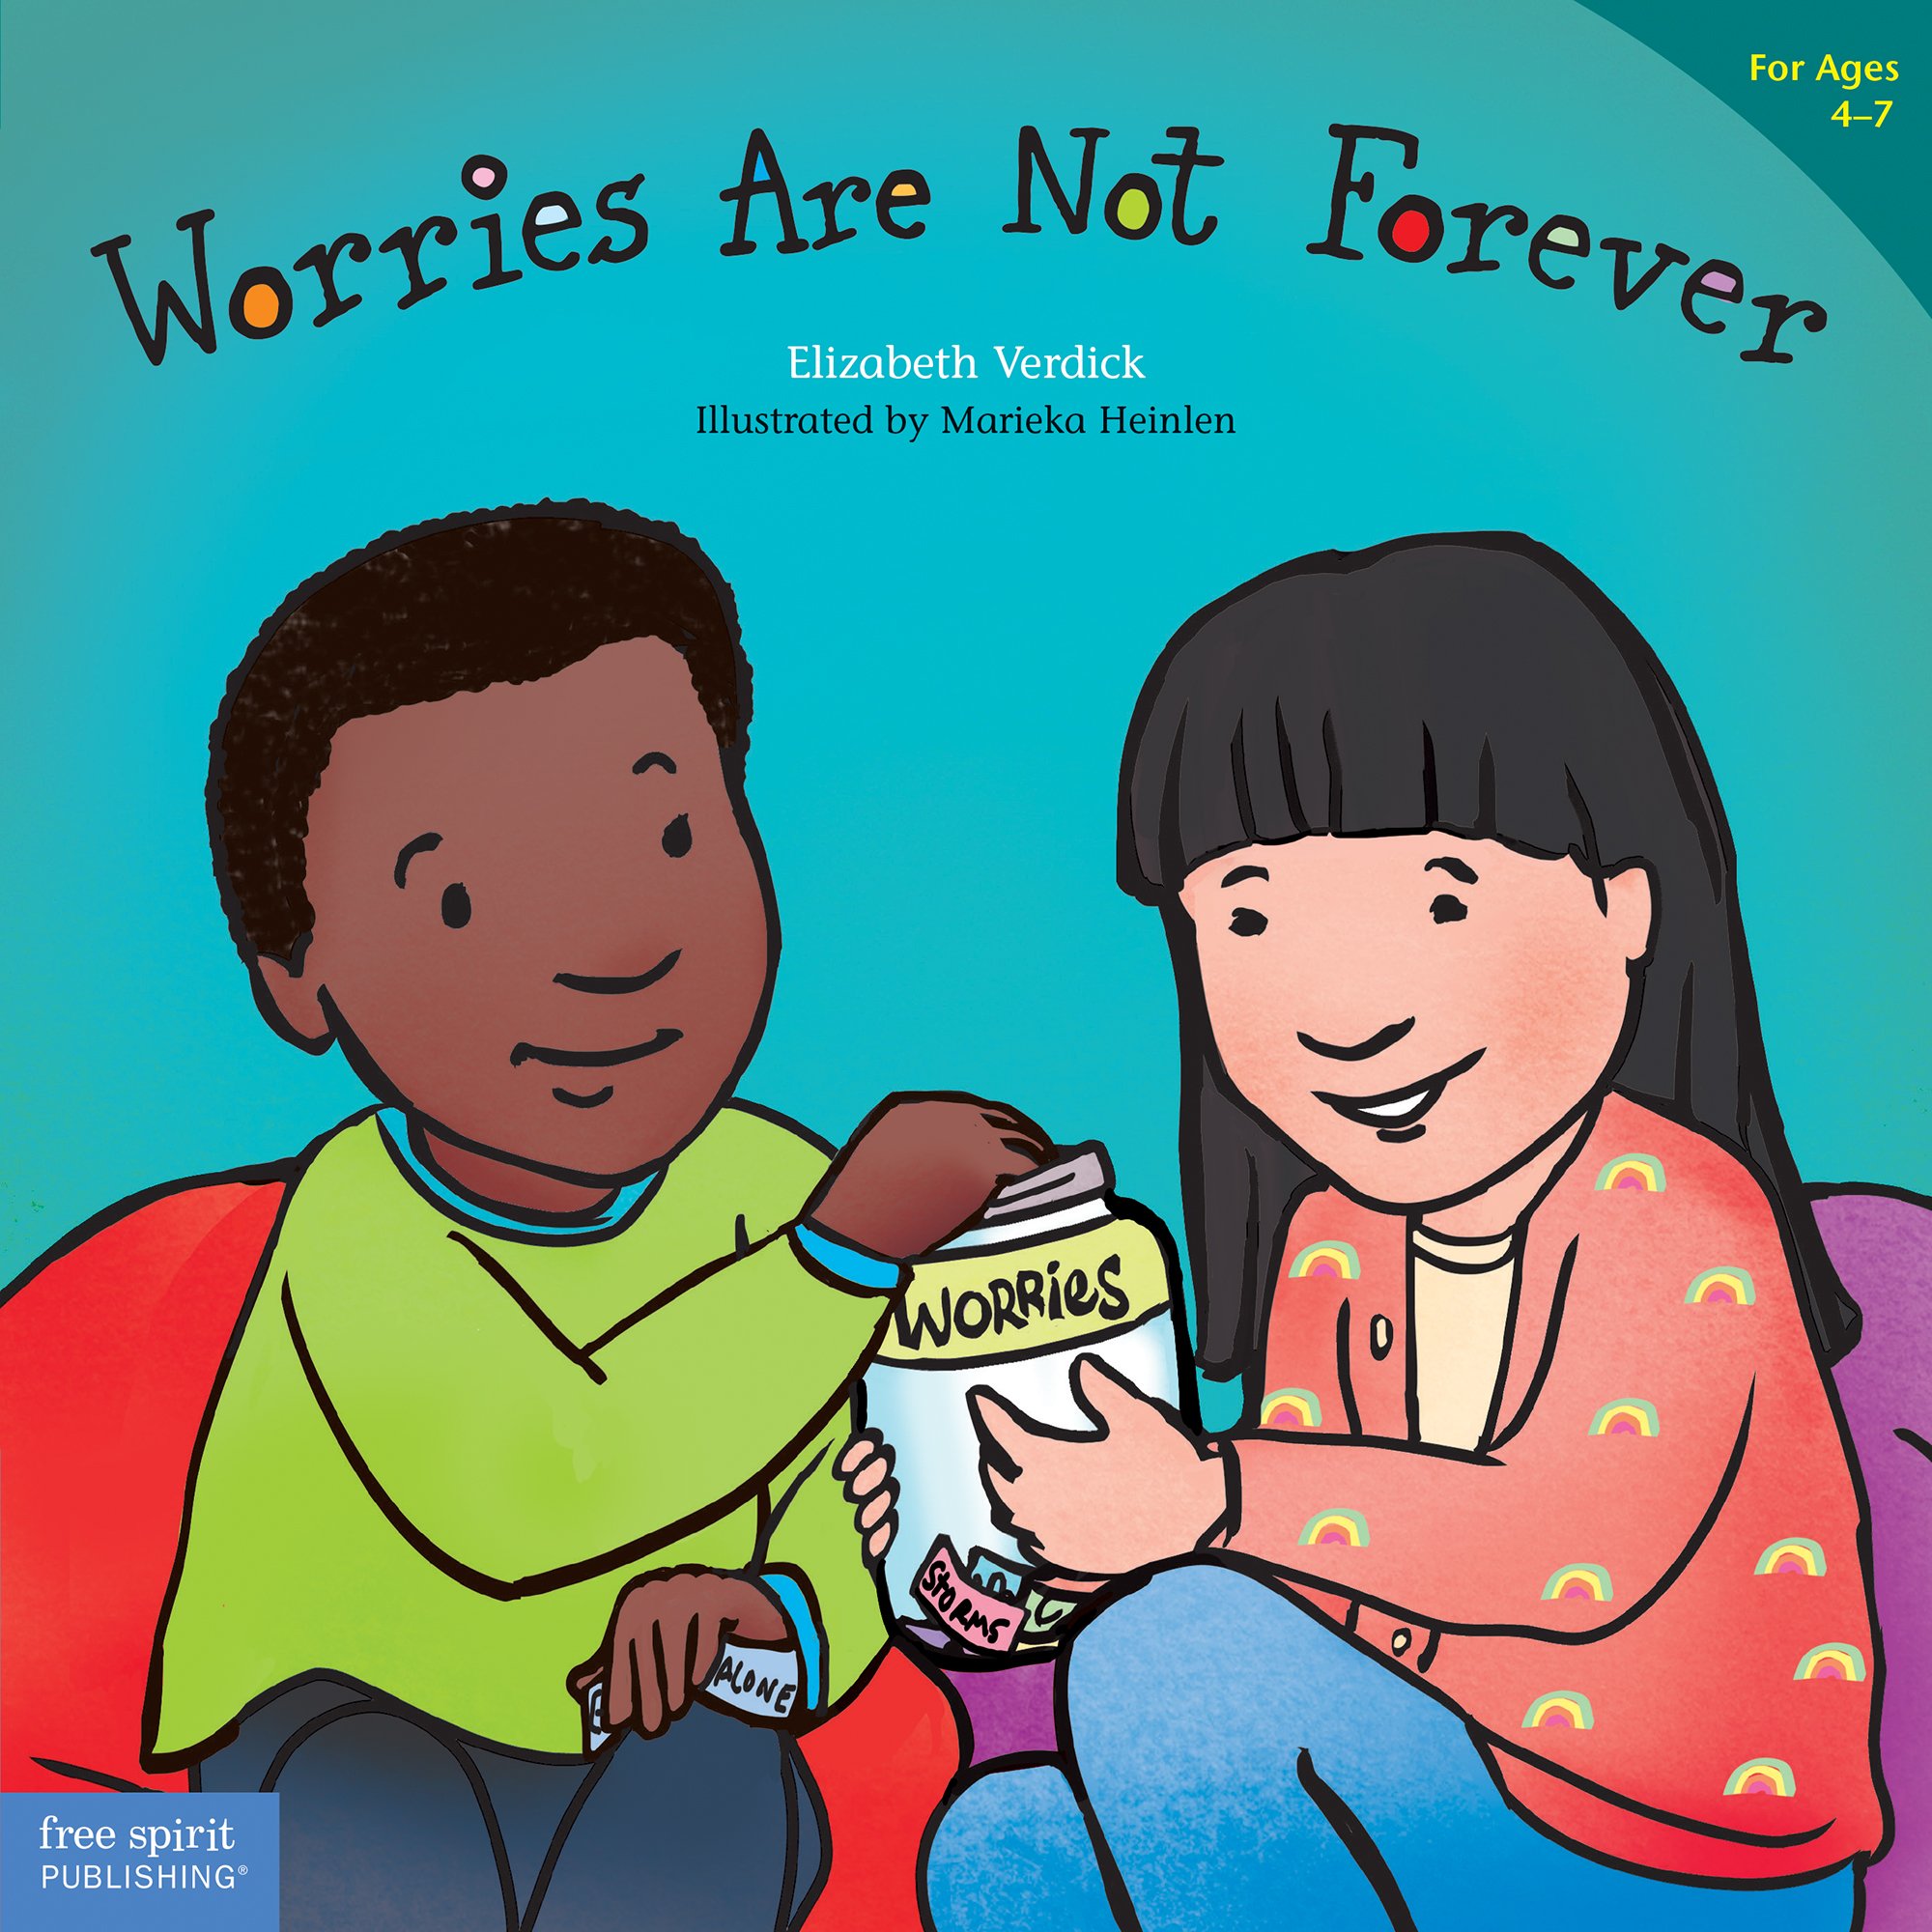 Book Cover: "Worries are not forever by Elizabeth Verdick (Author), Marieka Heinlen (Illustrator) (Best Behavior Series" with illustration of two young children on the couch. 